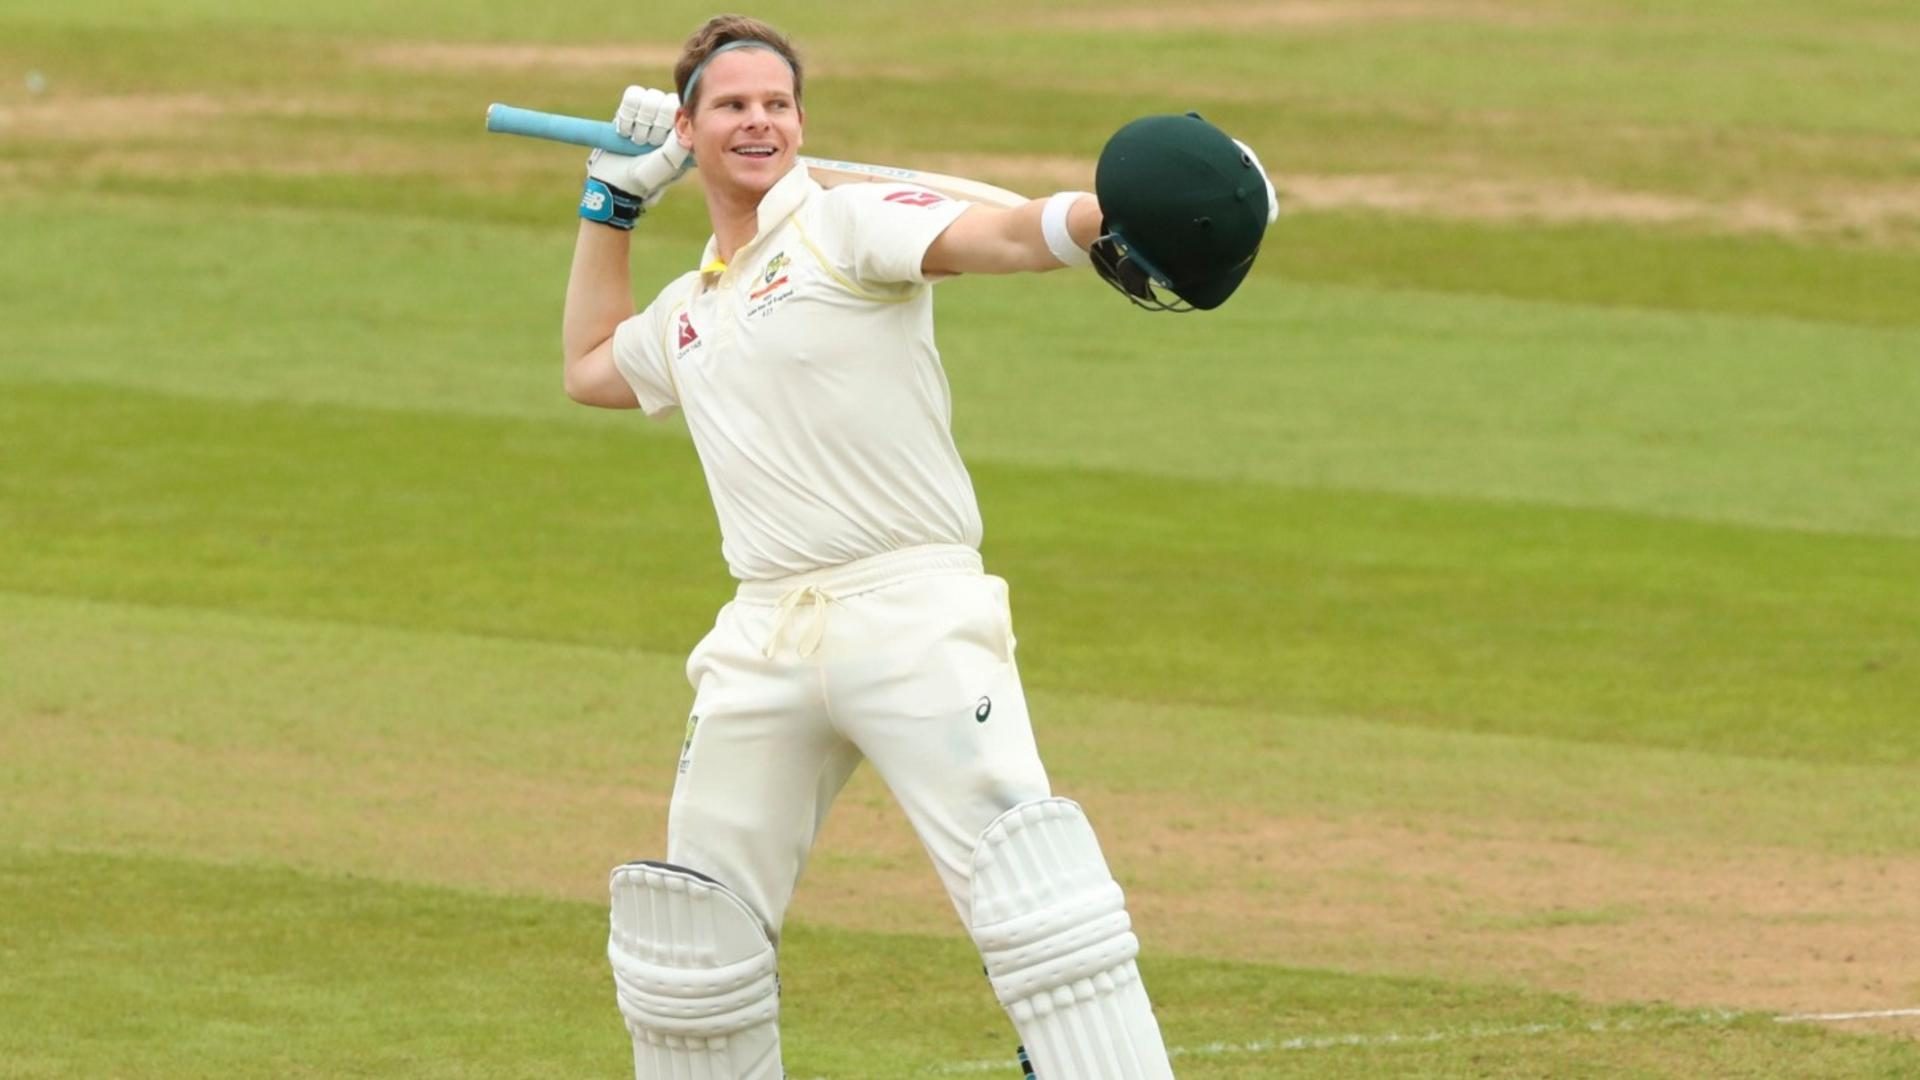 Steve Smith centuries in Tests: Know all his red-ball tons